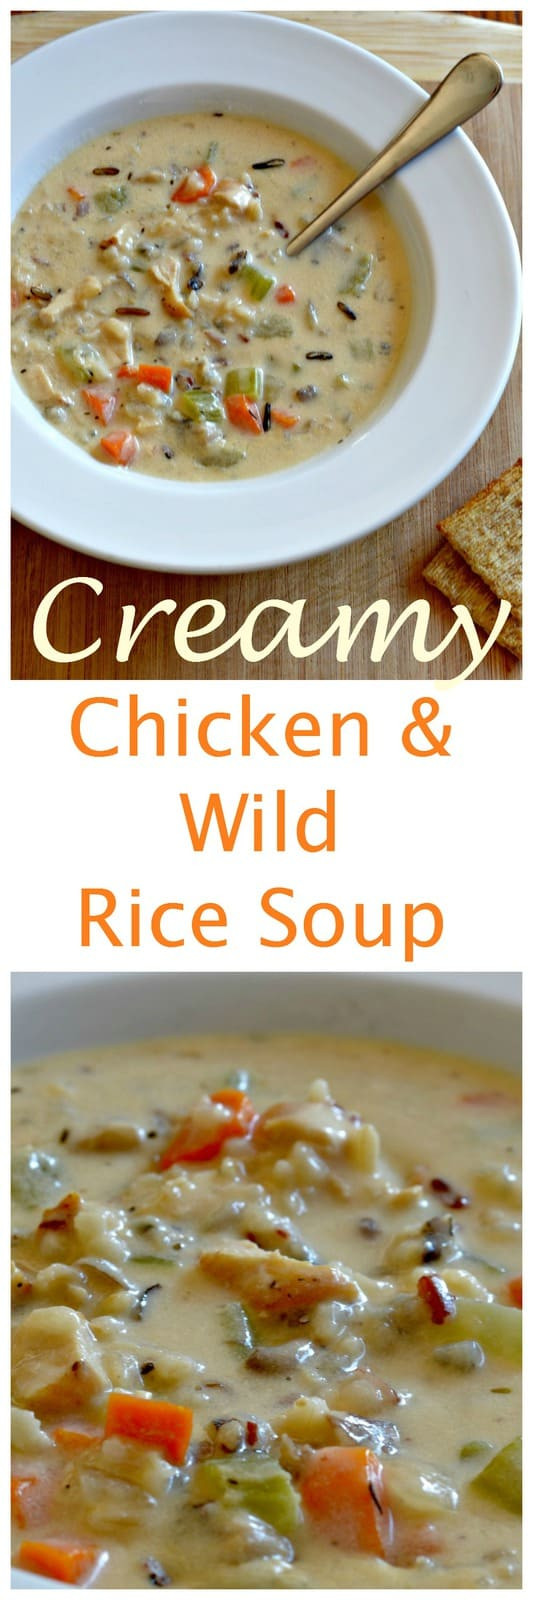 Cream Of Chicken Soup And Rice Side Dish
 Creamy Chicken and Wild Rice Soup Happily Unprocessed